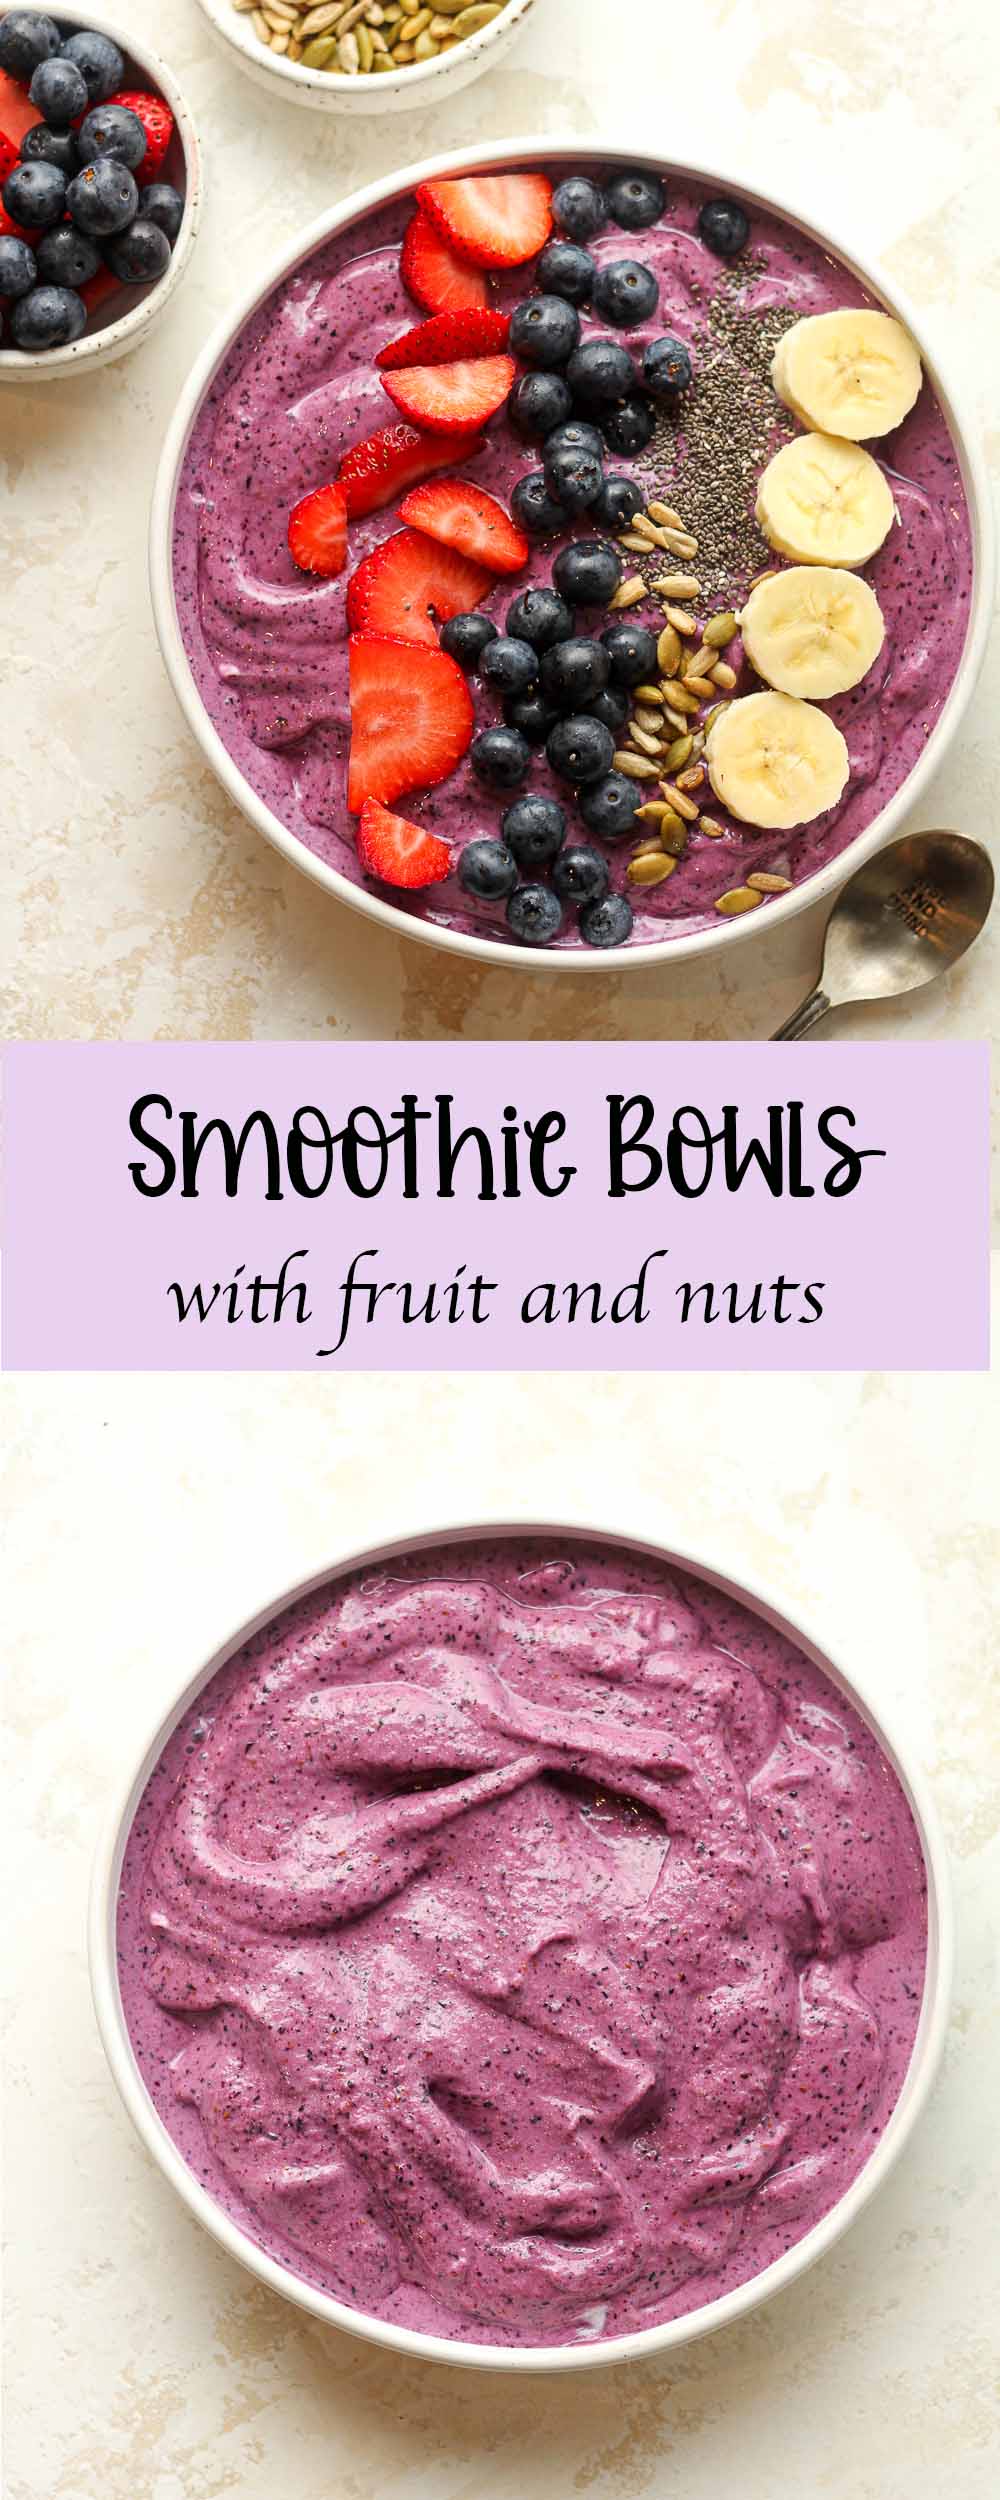 Two photos of smoothie bowls with fruit and nuts.